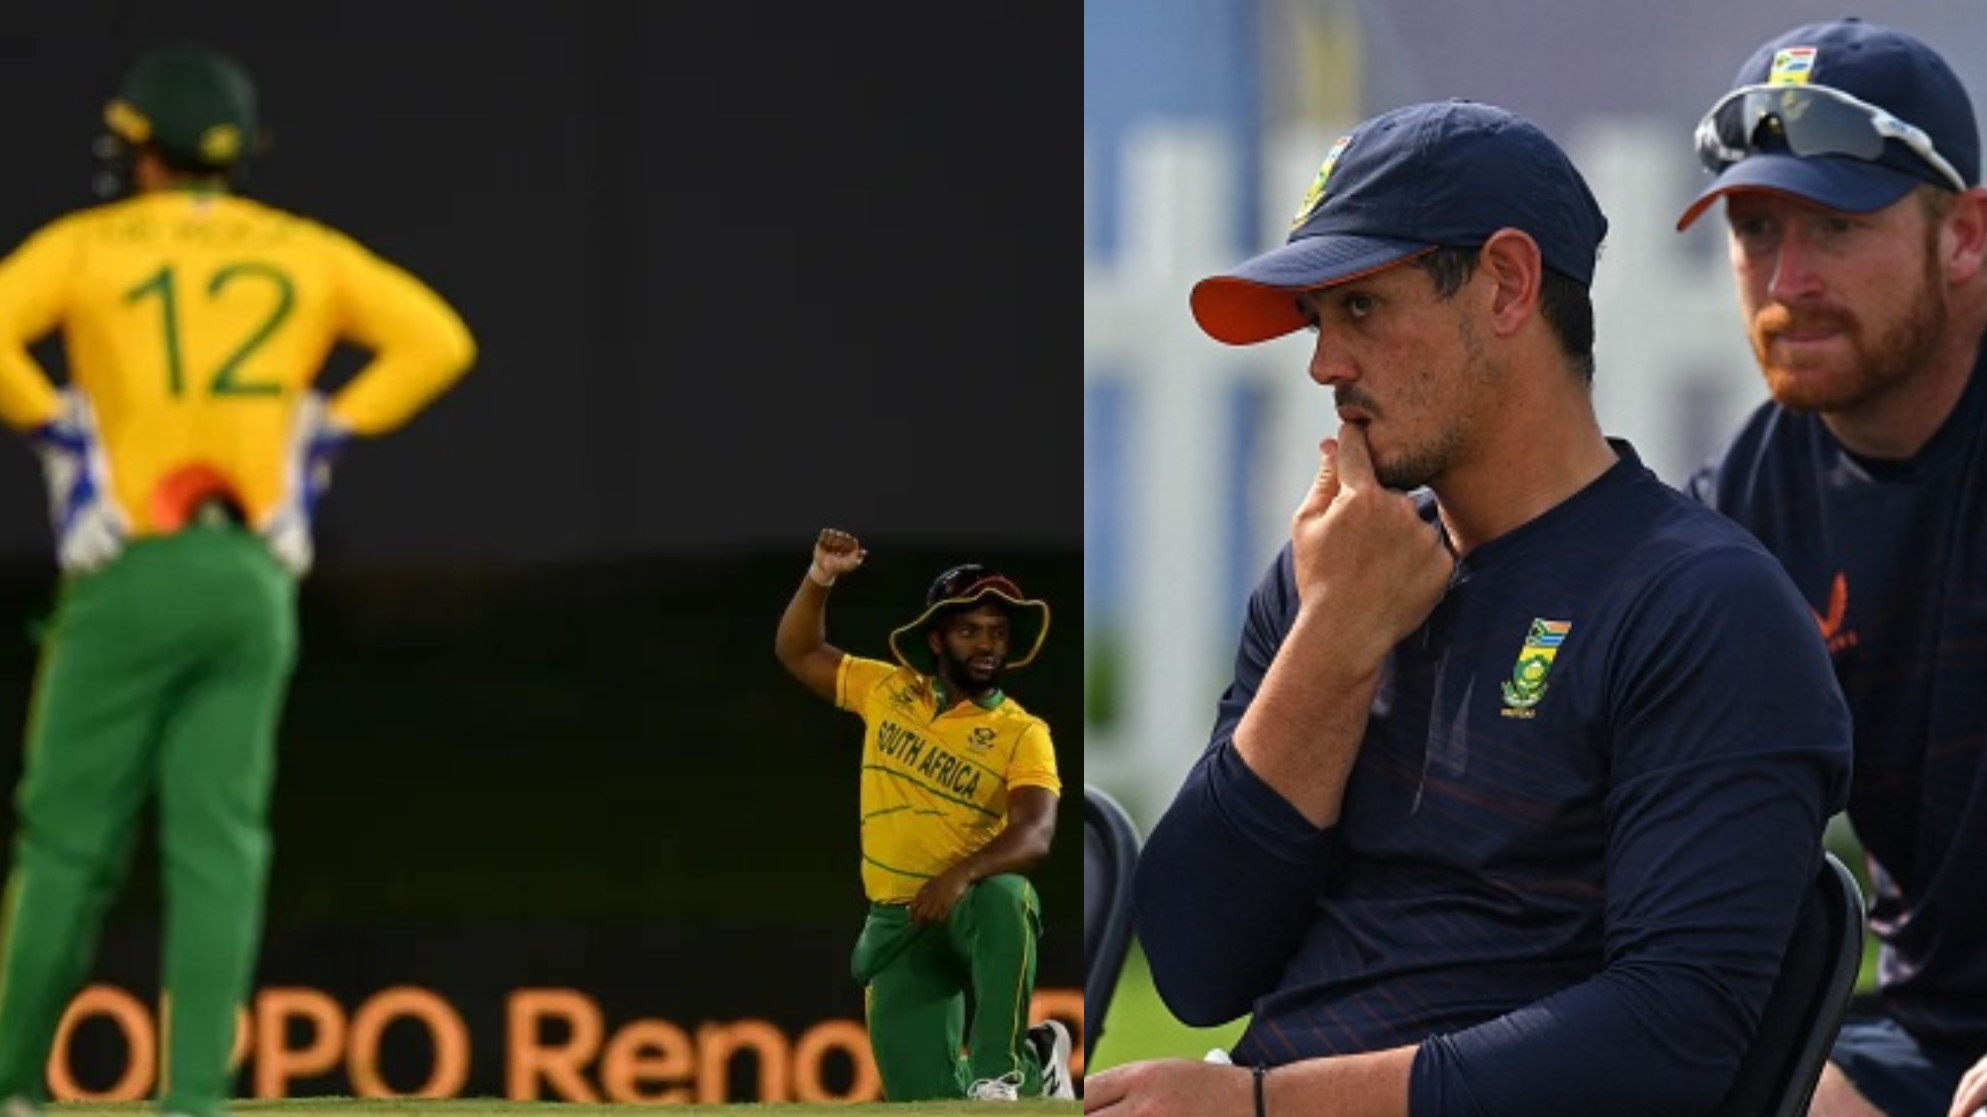 T20 World Cup 2021: Quinton de Kock makes himself unavailable for WI match; speculations rife